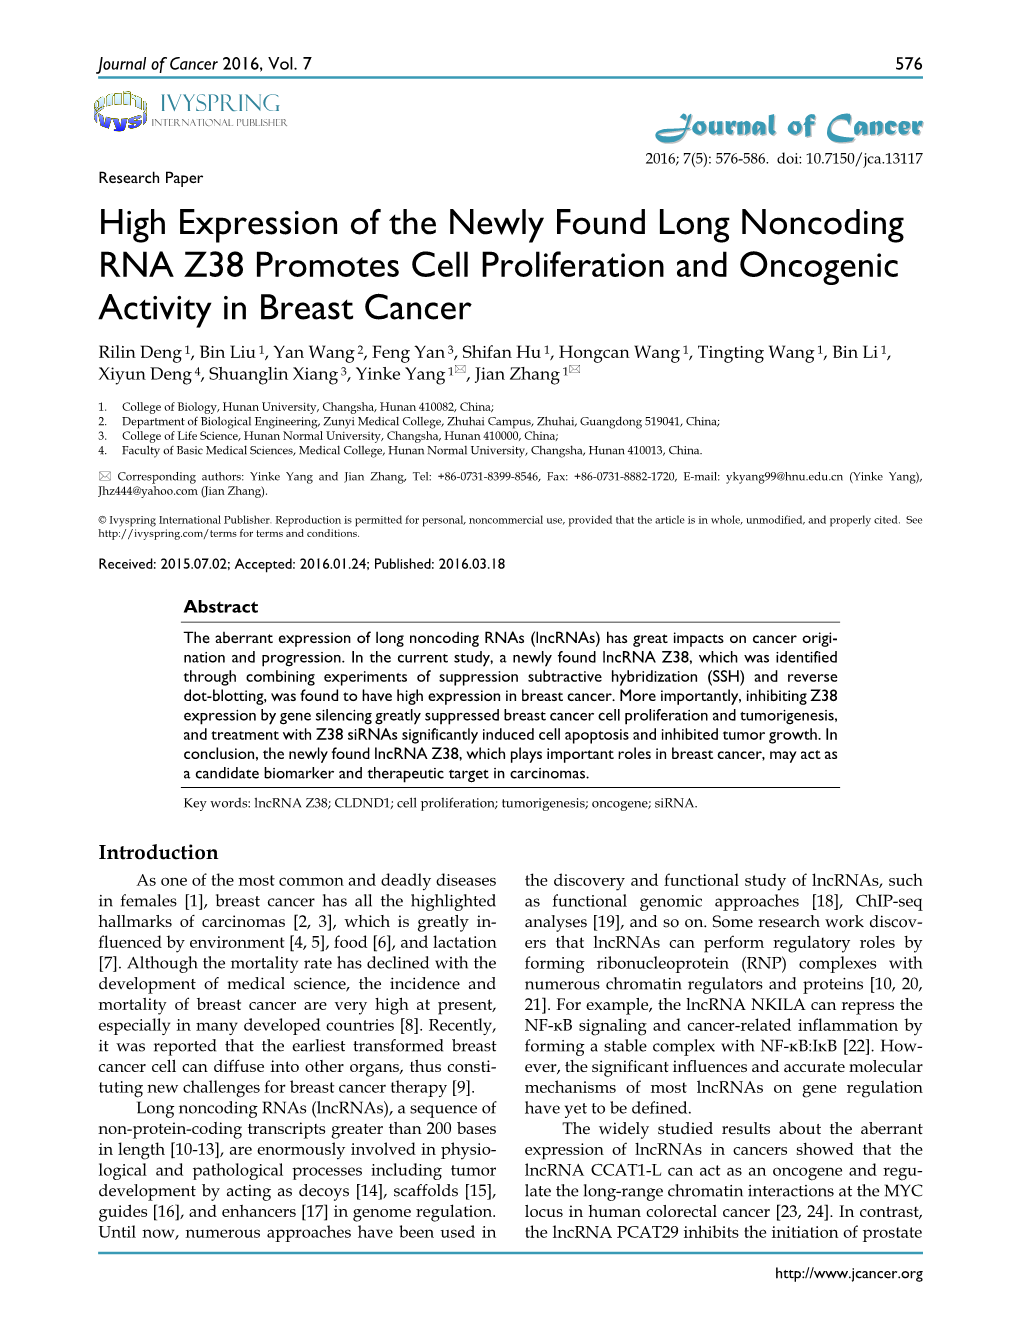 High Expression of the Newly Found Long Noncoding RNA Z38